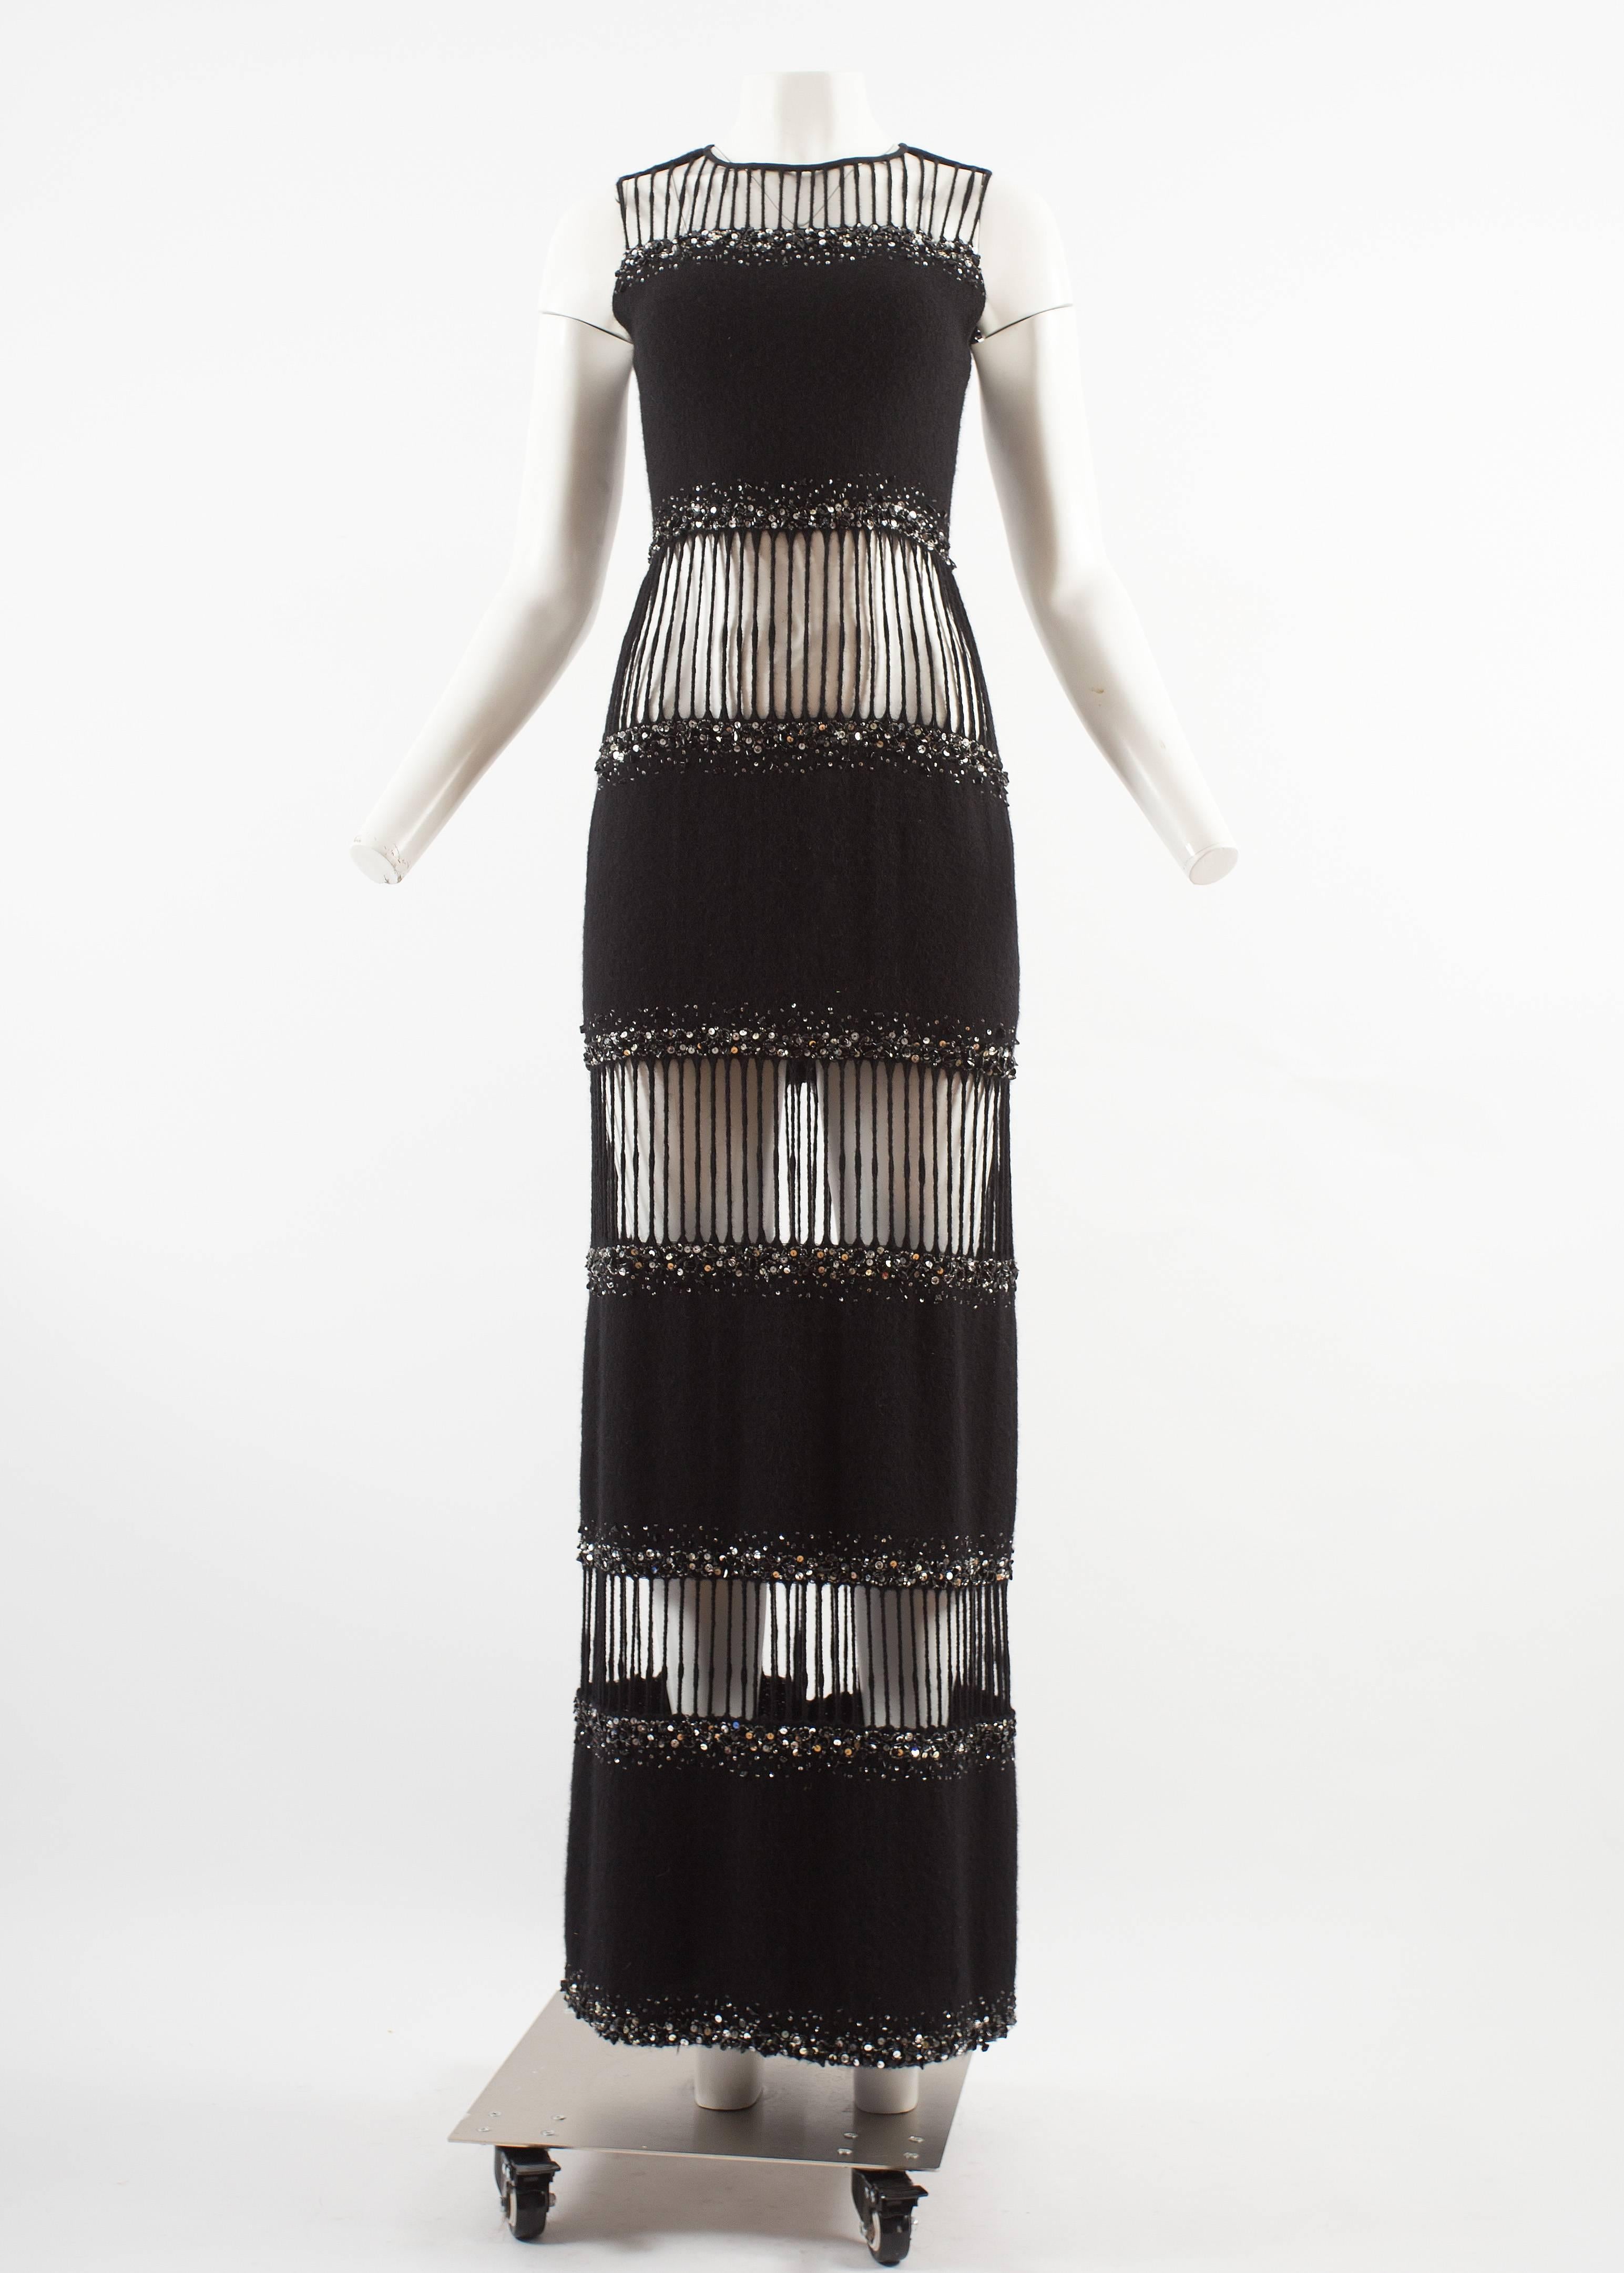 Hardy Amies 1960s couture embellished column evening dress with cutouts

